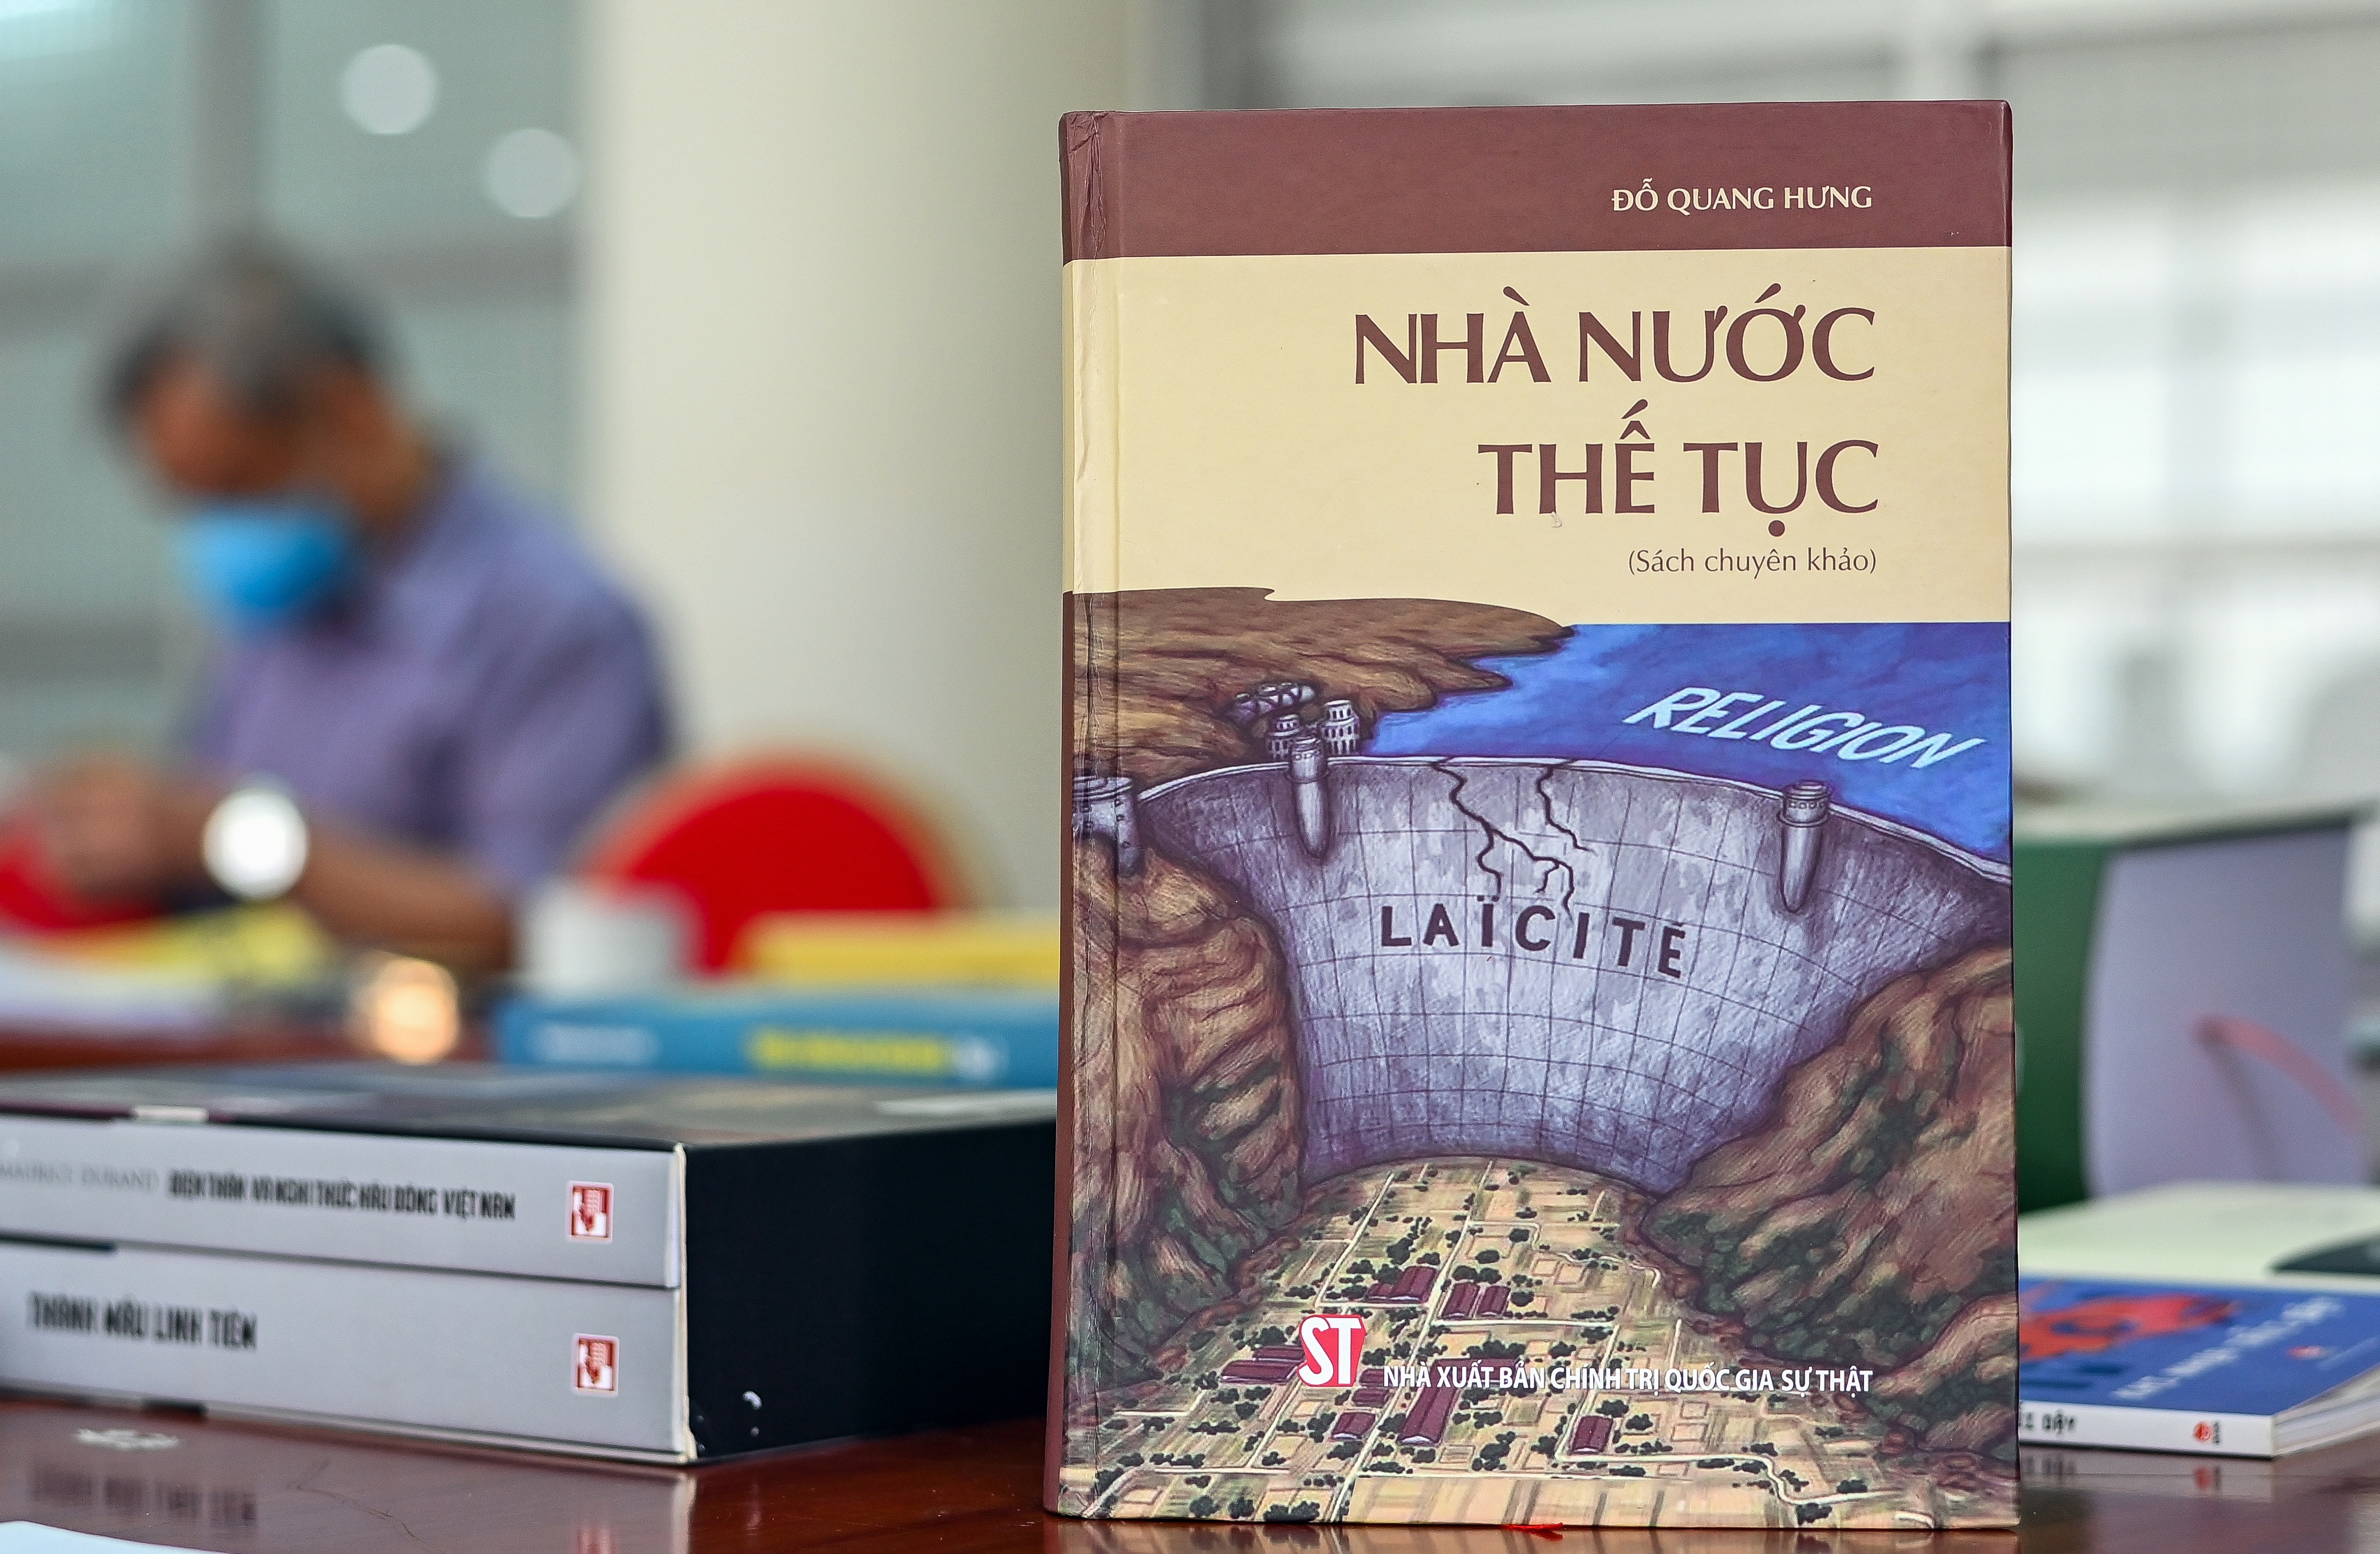 Nha nuoc the tuc anh 1